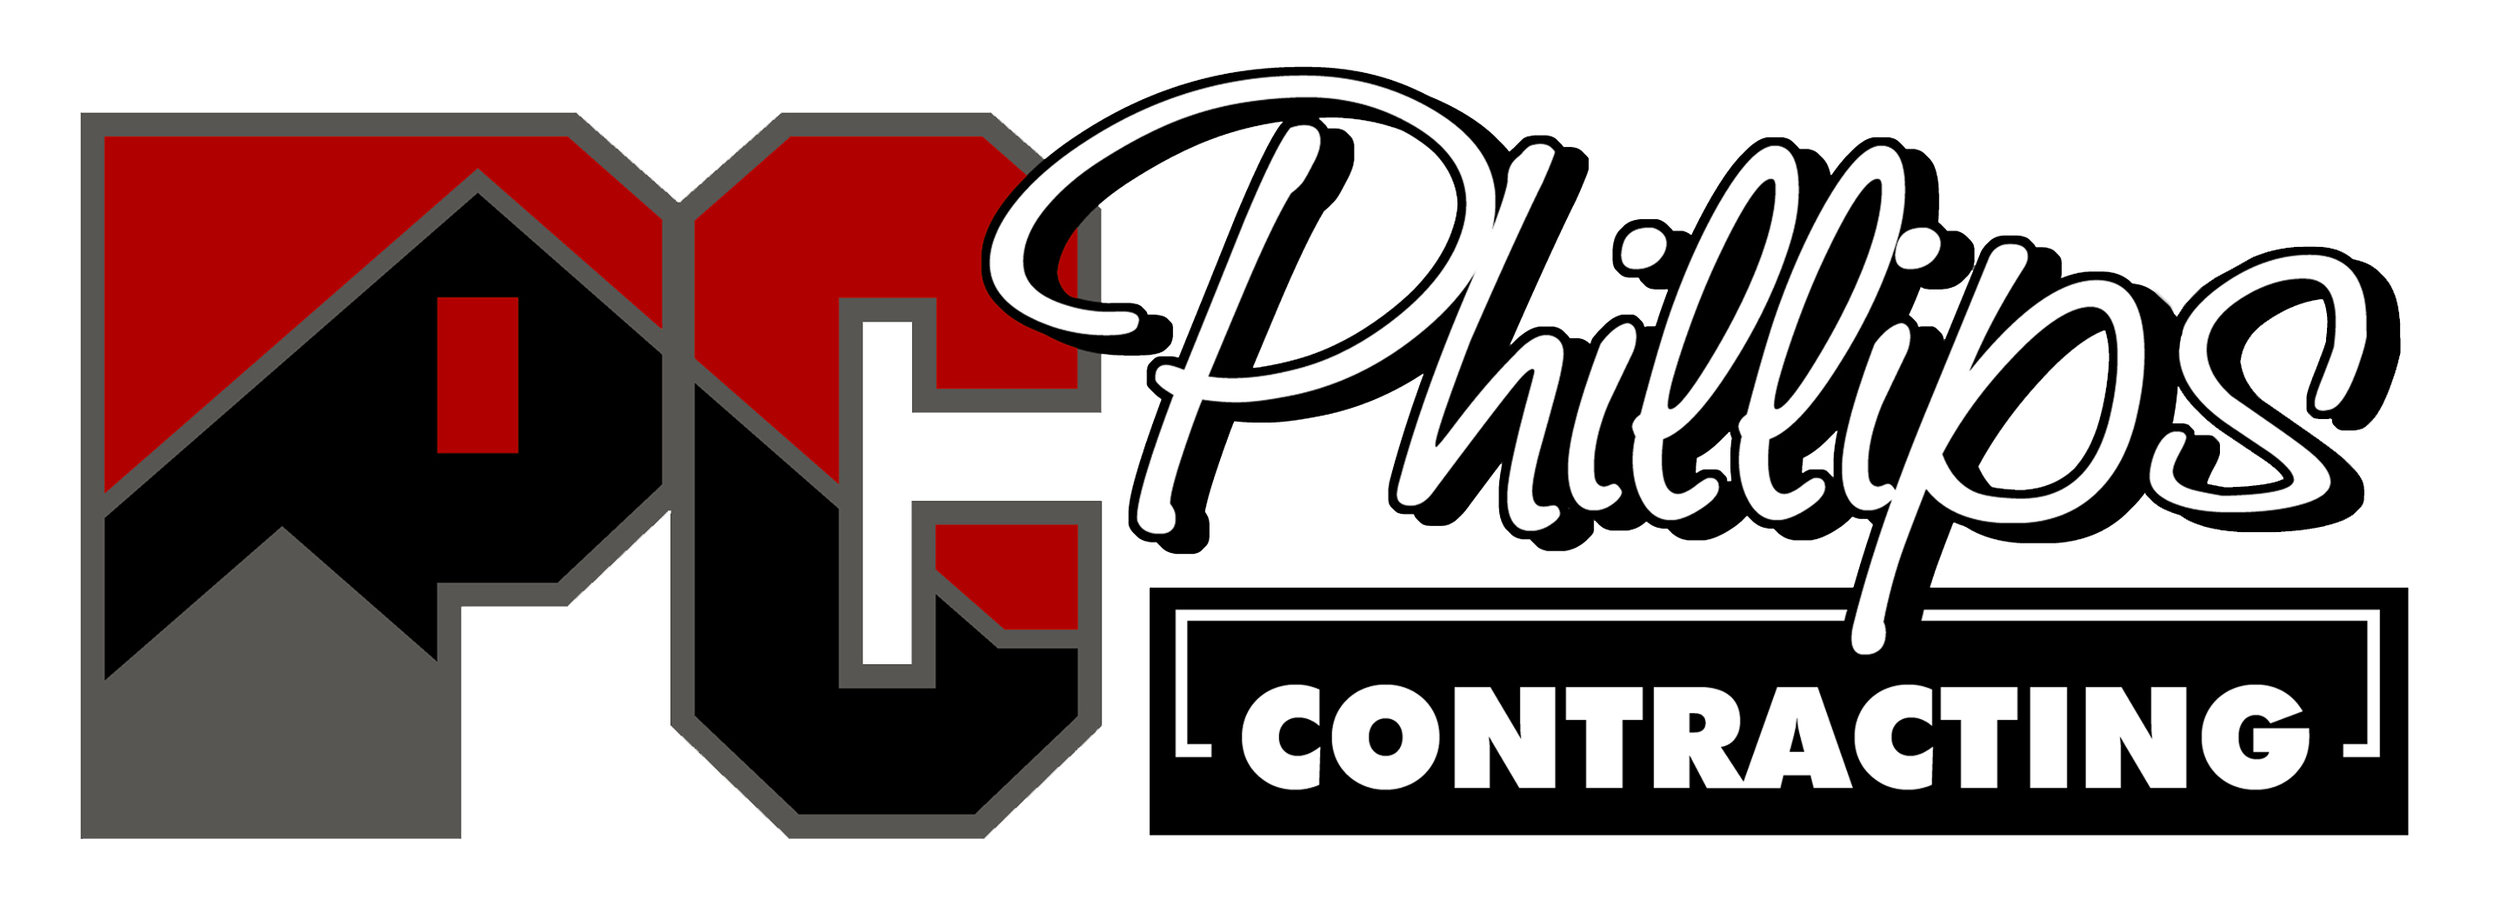 Phillips Contracting